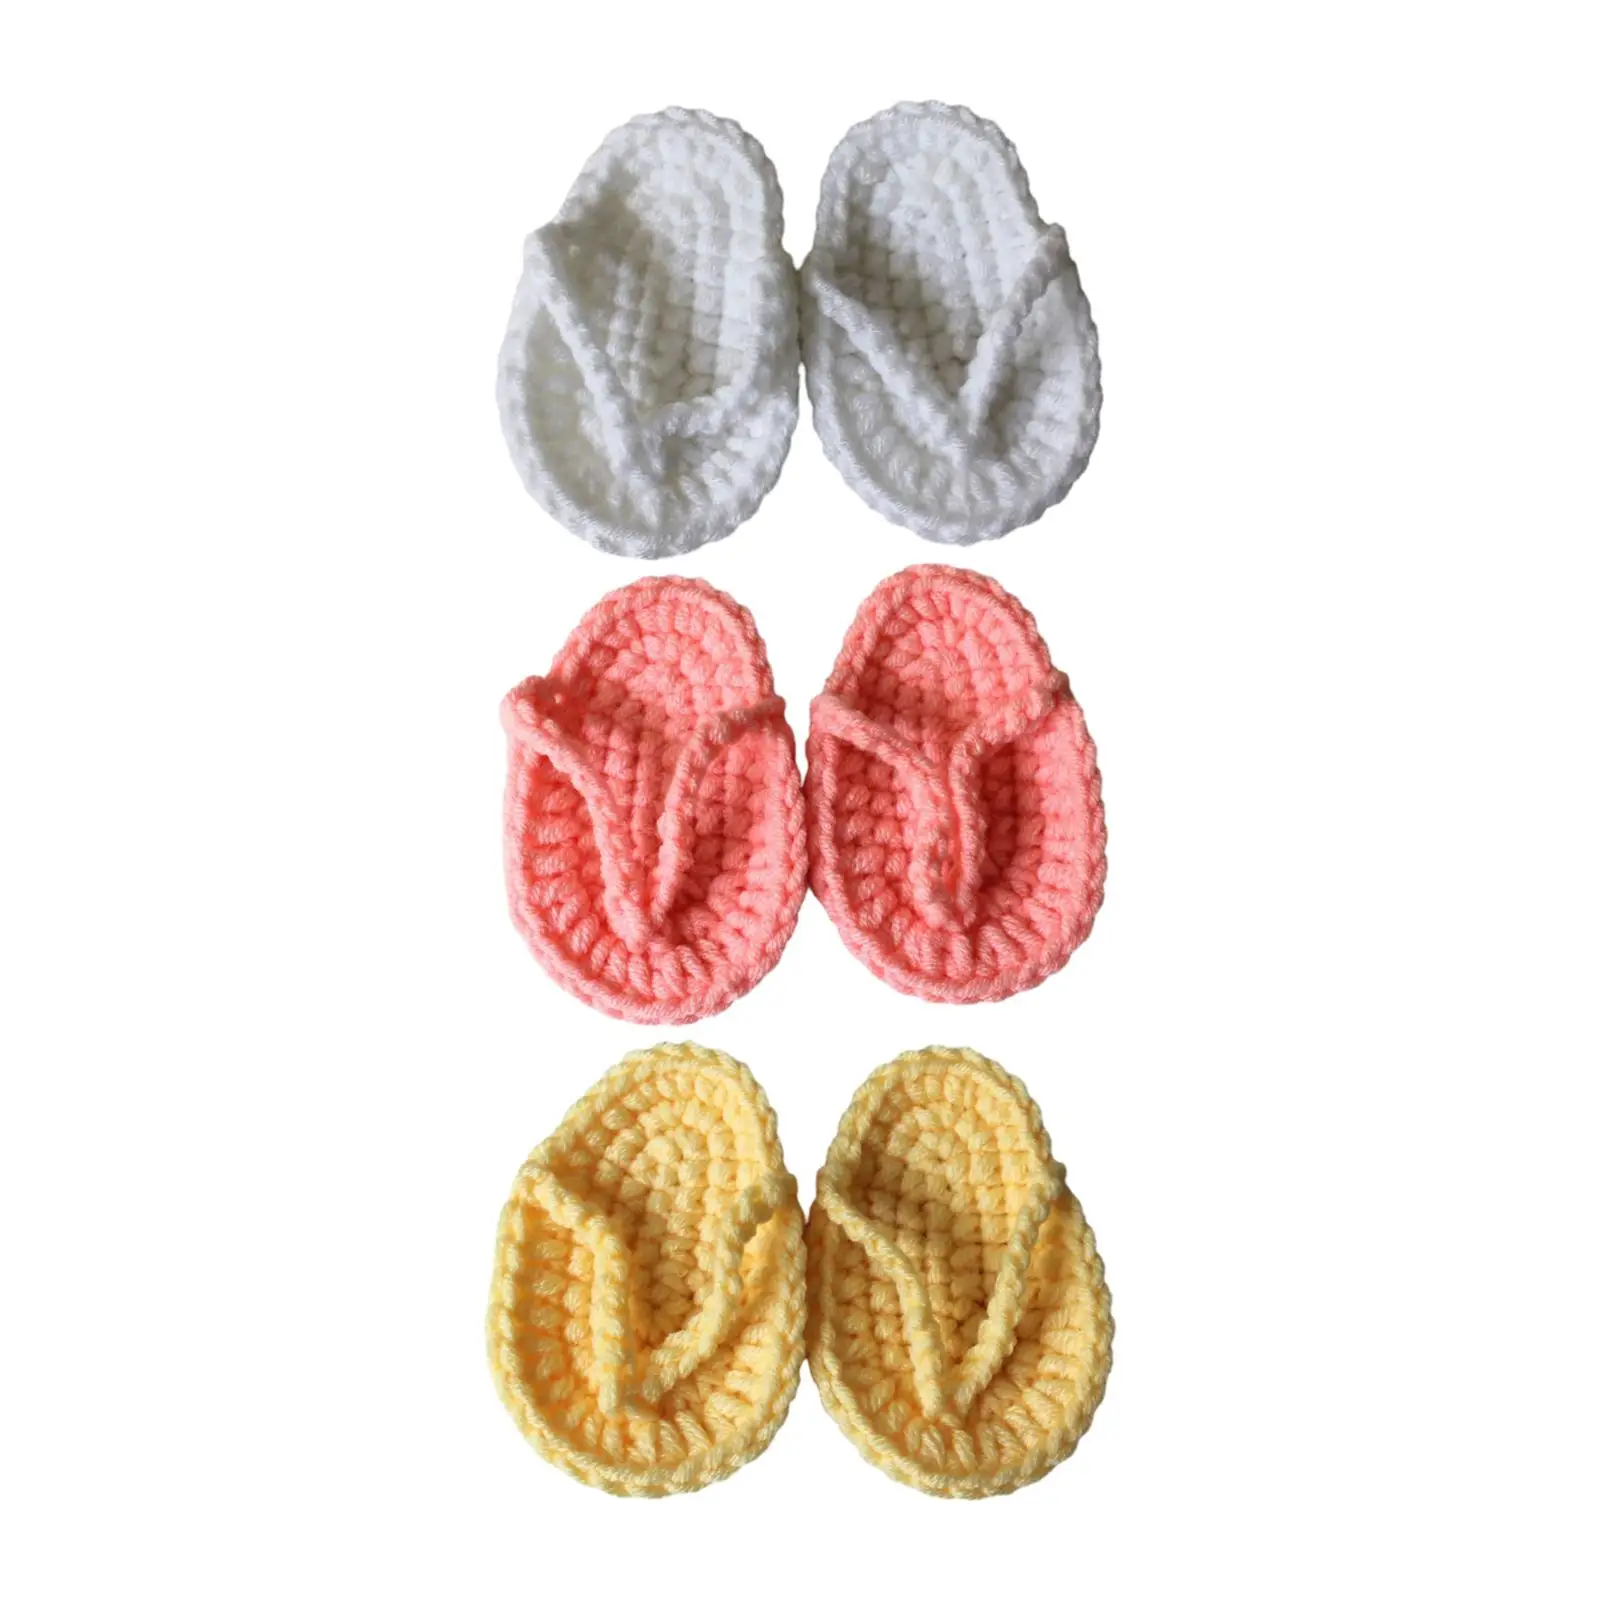 Infant Slippers Newborn Props 2.75inch Skin Friendly Shoes for Newborn Infant Baby Baby Photo Props Children`s Shoes Mini 1 Pair